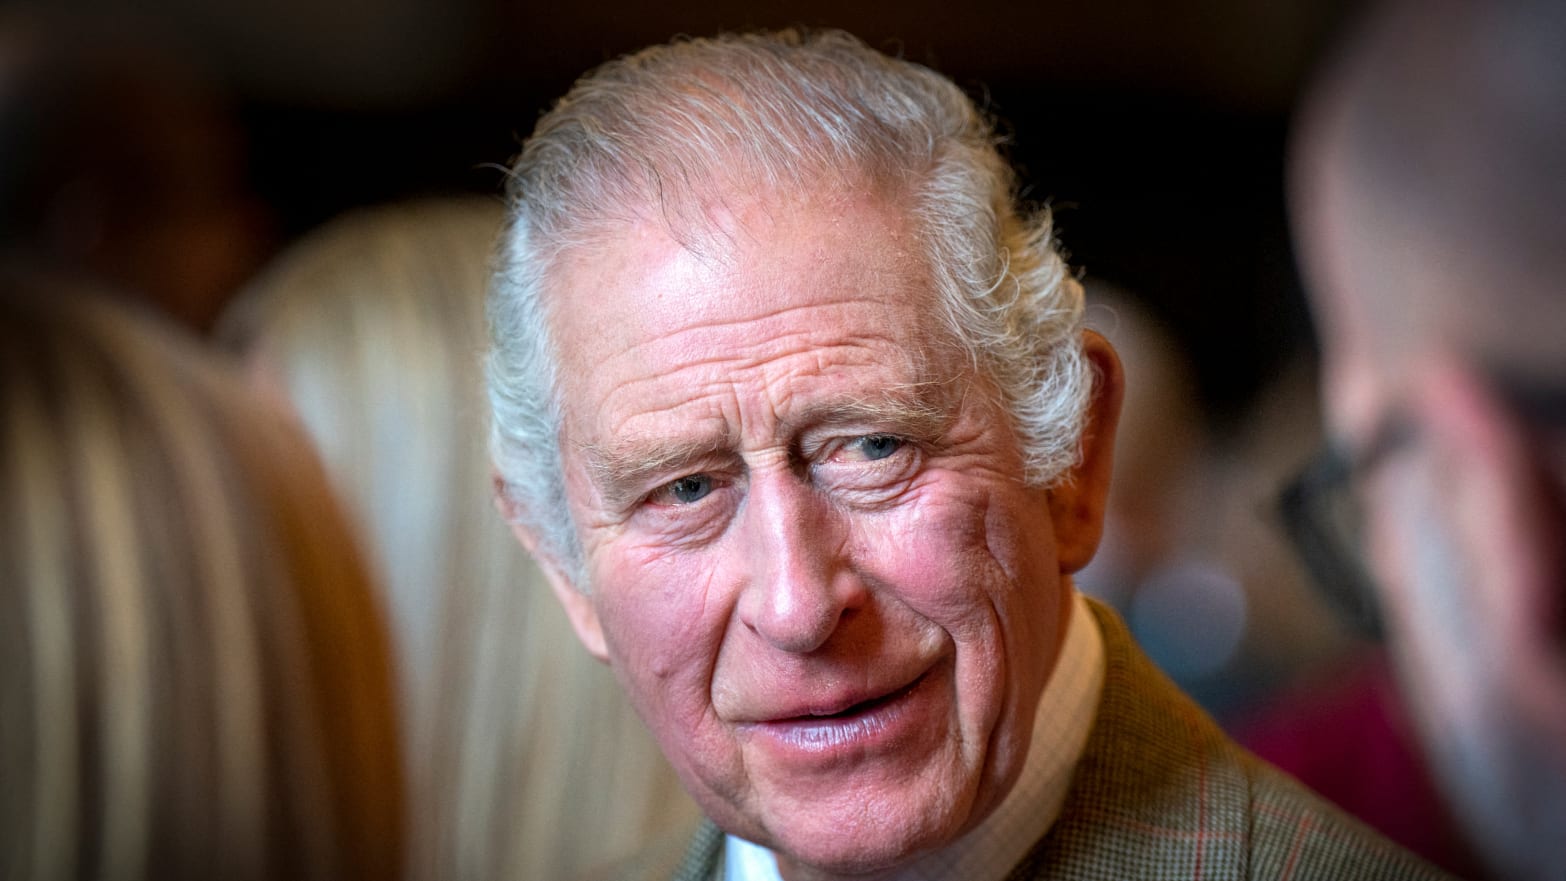 King Charles III visits Aberdeen Town House to meet families who have settled in Aberdeen from Afghanistan, Syria and Ukraine, in Aberdeen, Scotland, Britain October 17, 2022.